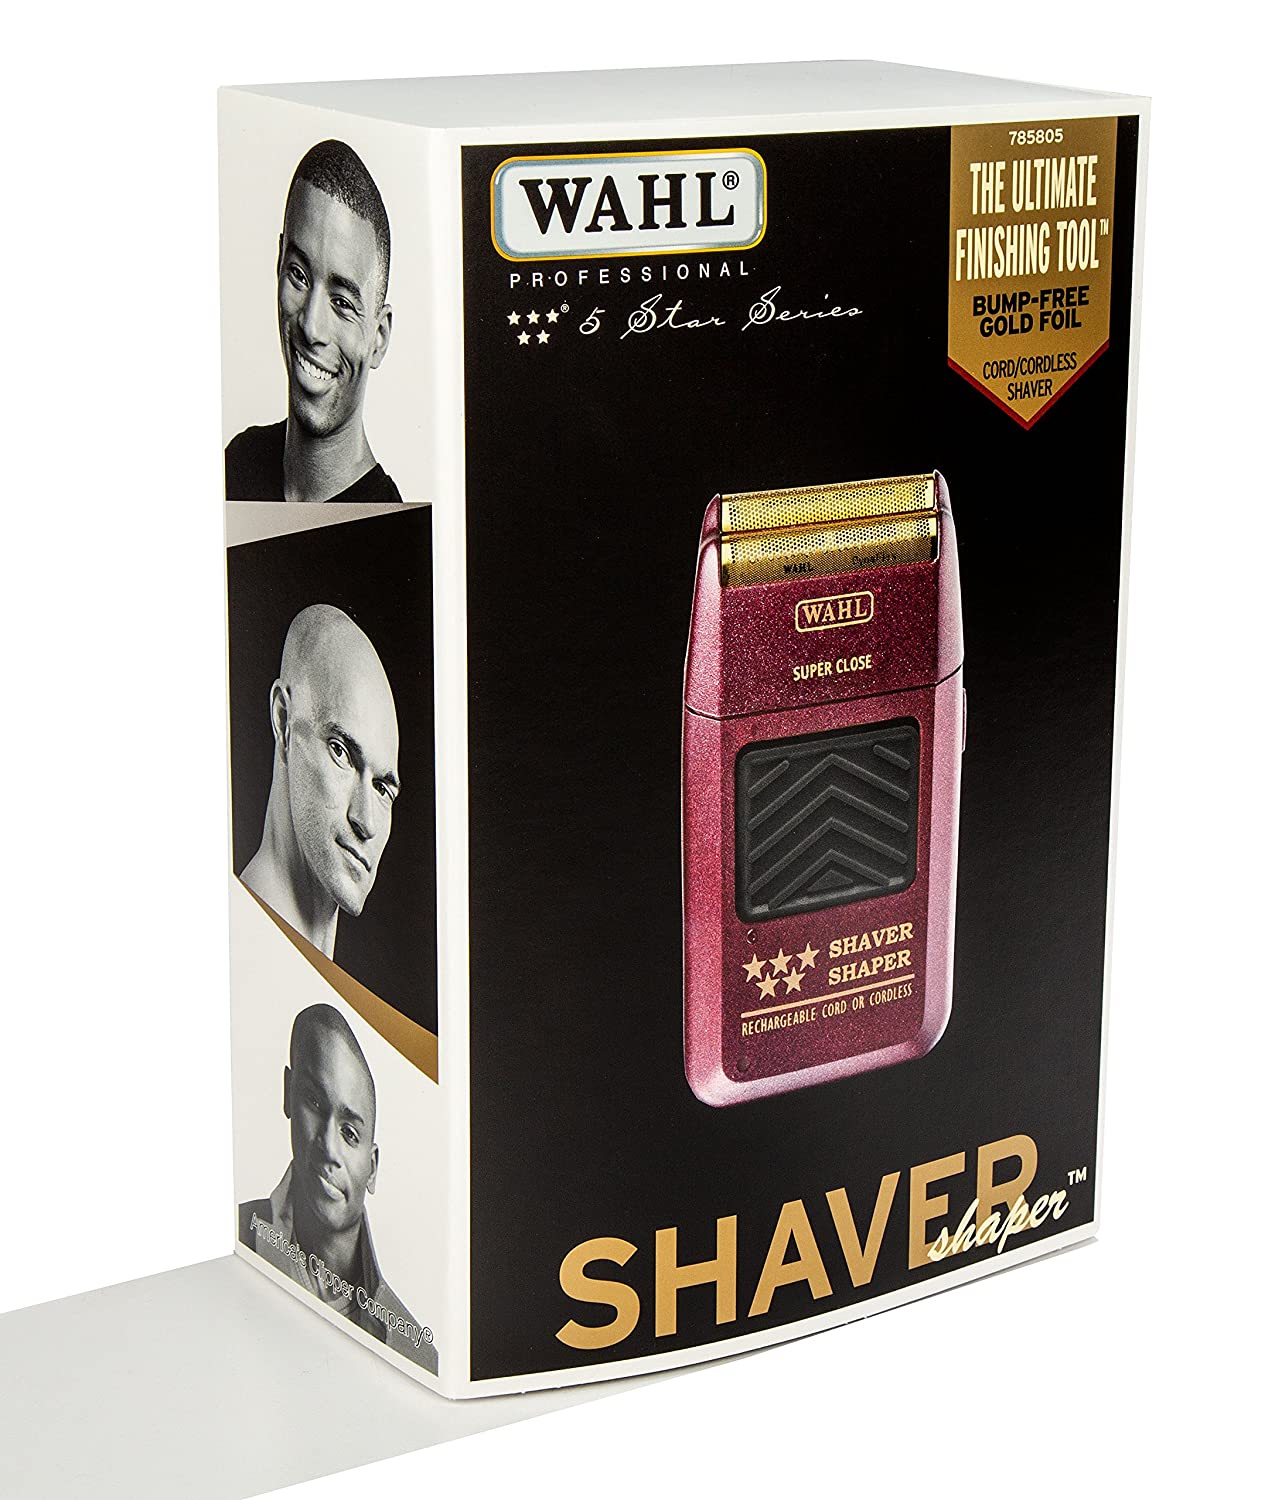 Wahl Professional 5-Star Series Rechargeable Shaver Shaper #8061-100 Up to 60  Minutes of Run Time Bump-Free, Ultra-Close Shave